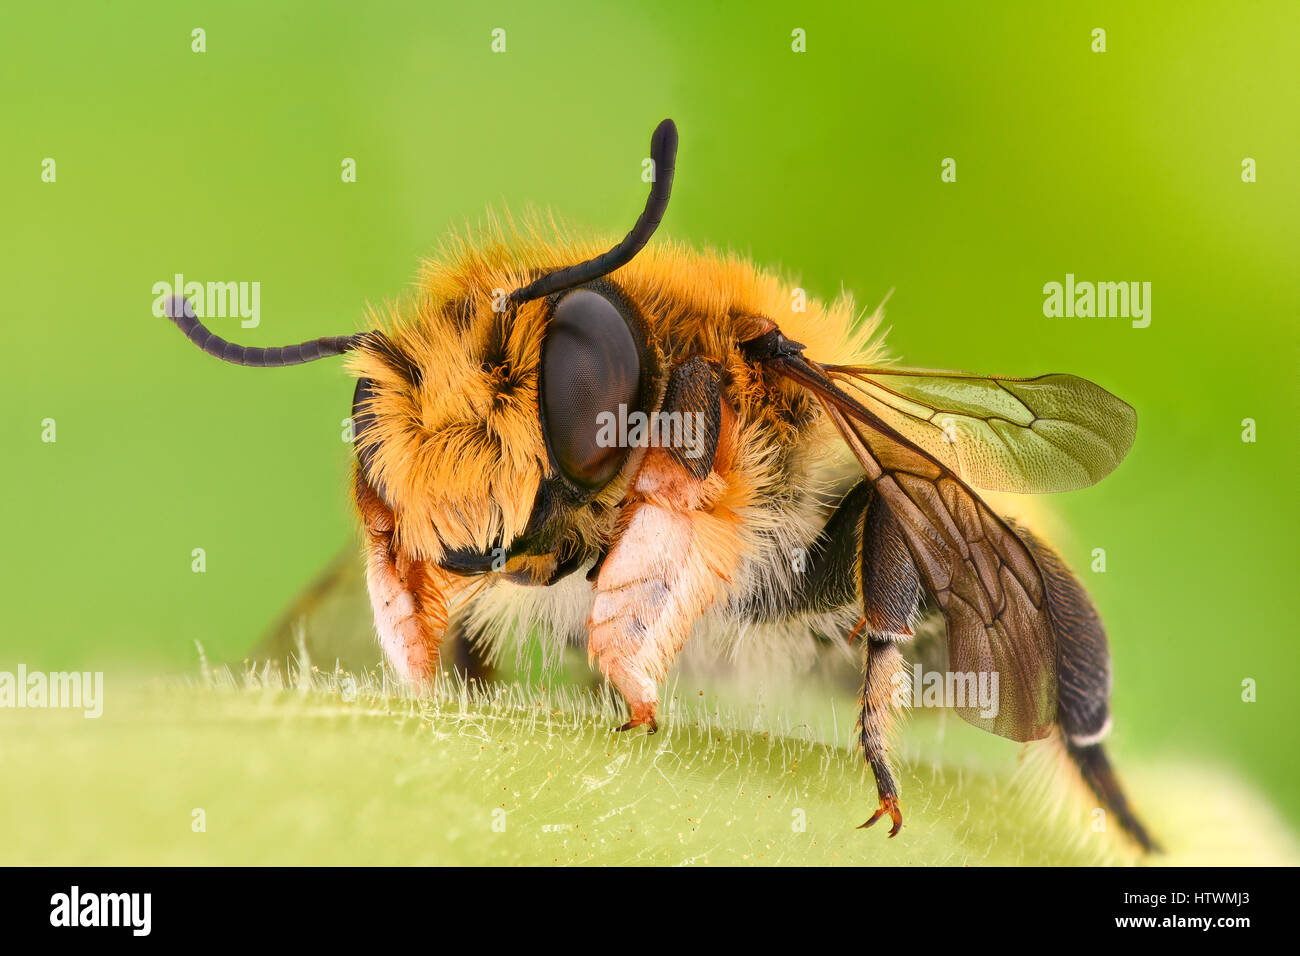 Extreme magnification - Solitaire Bee Megachilidae Stock Photo